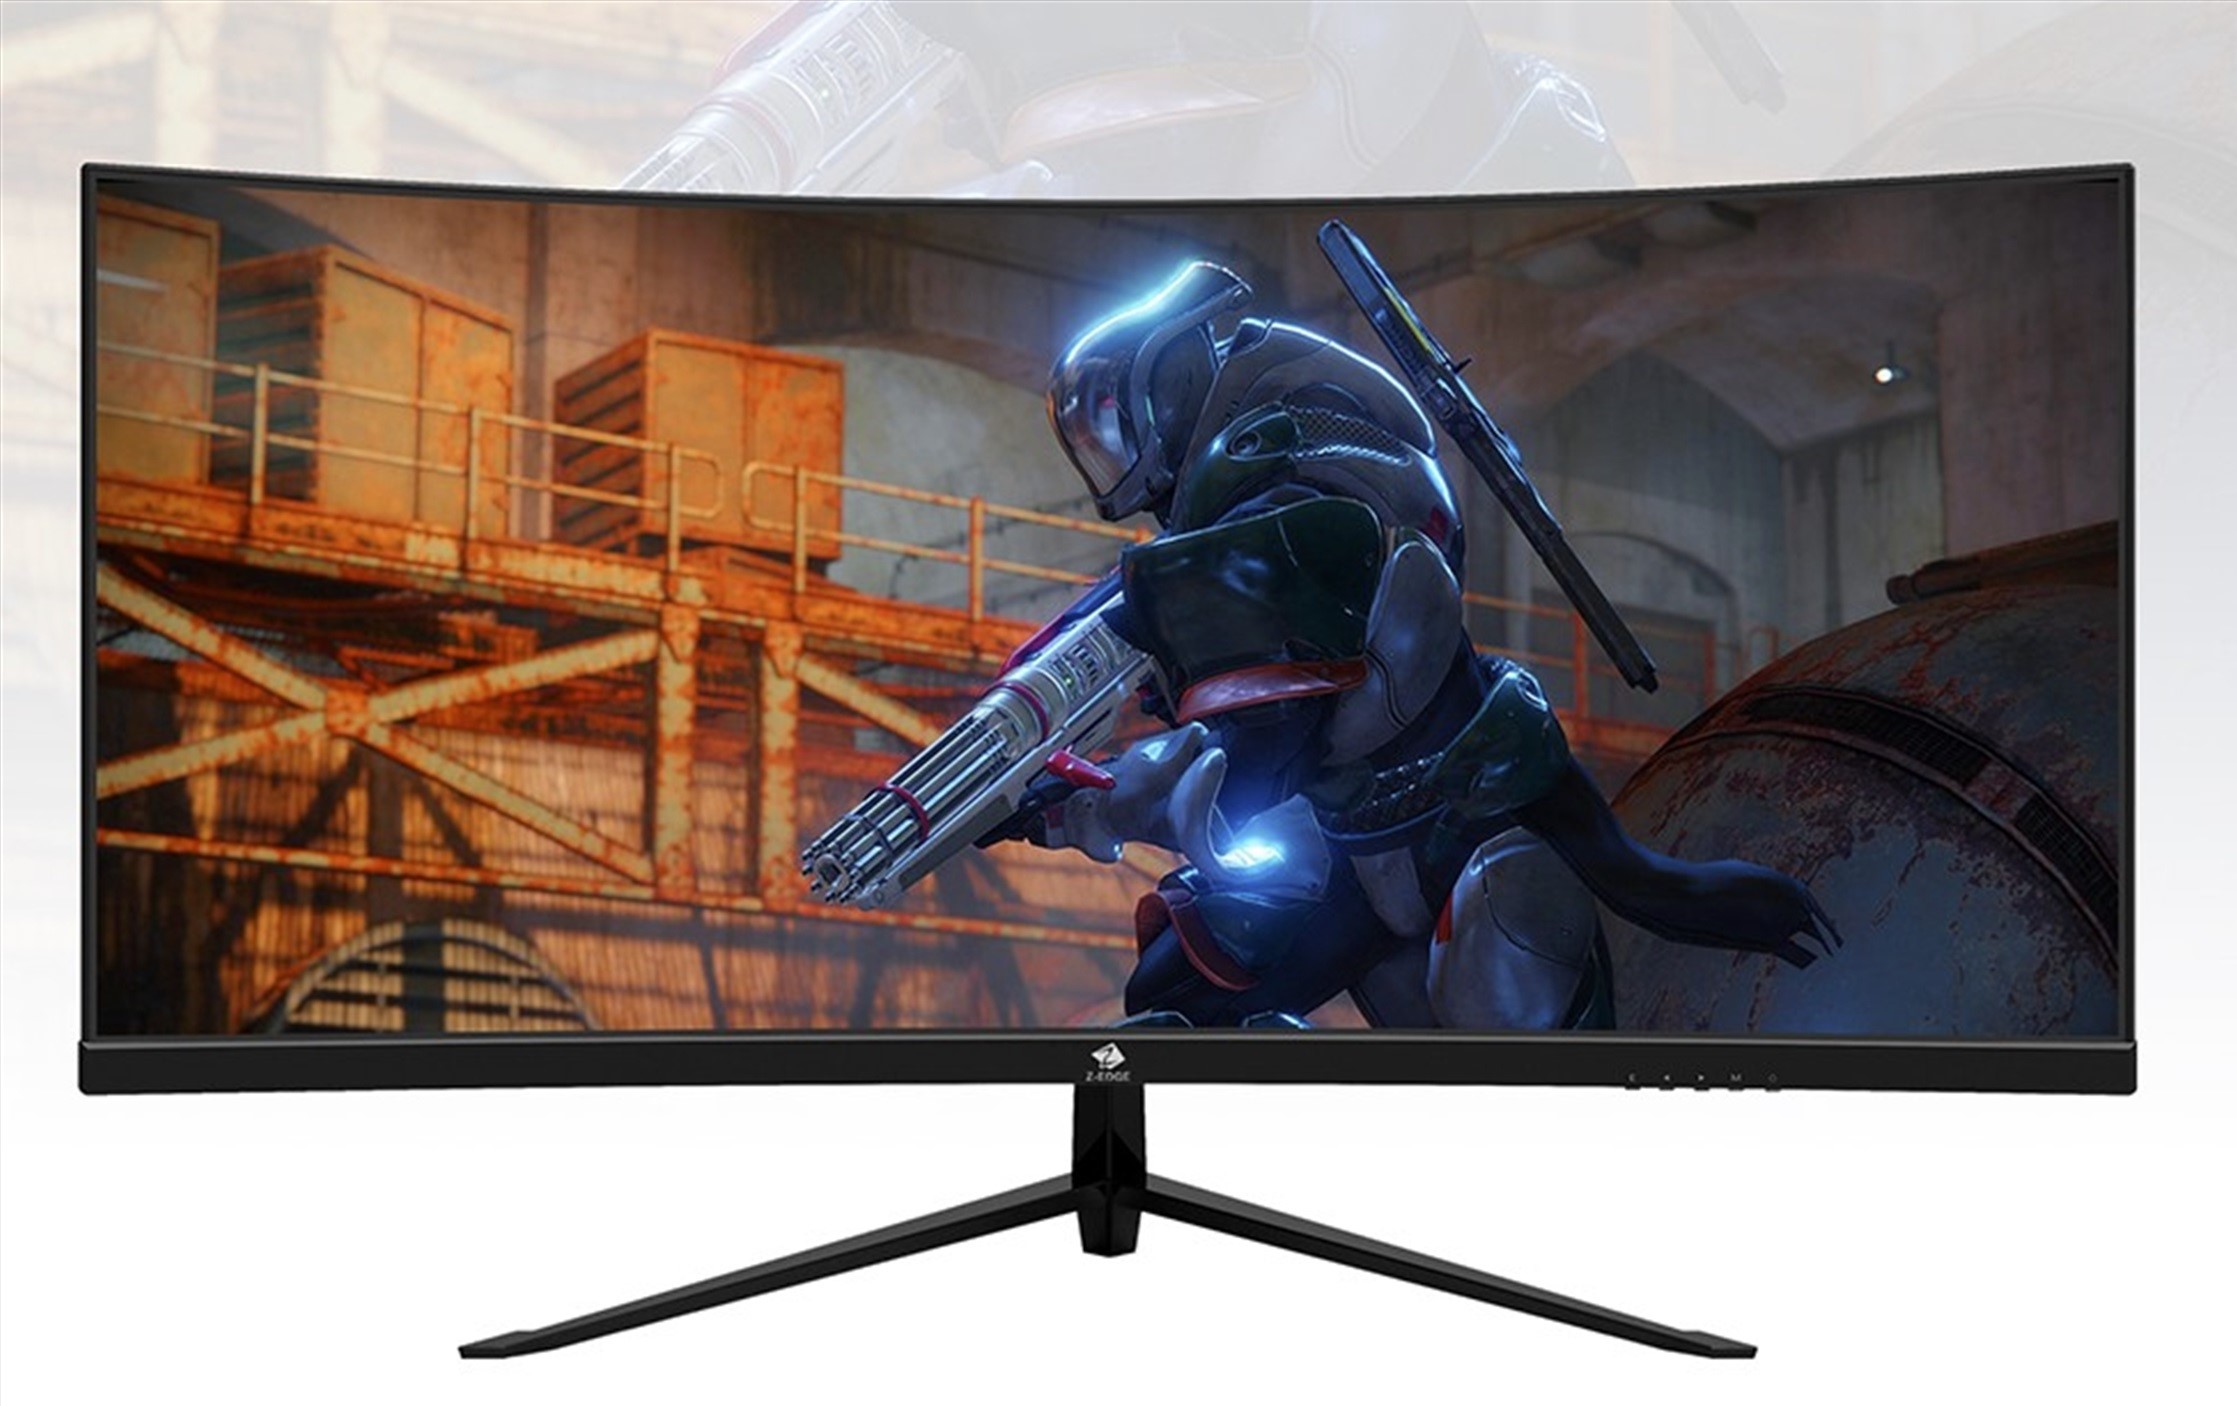 This widely, curved 30-inch gaming monitor has 200Hz refresh rate